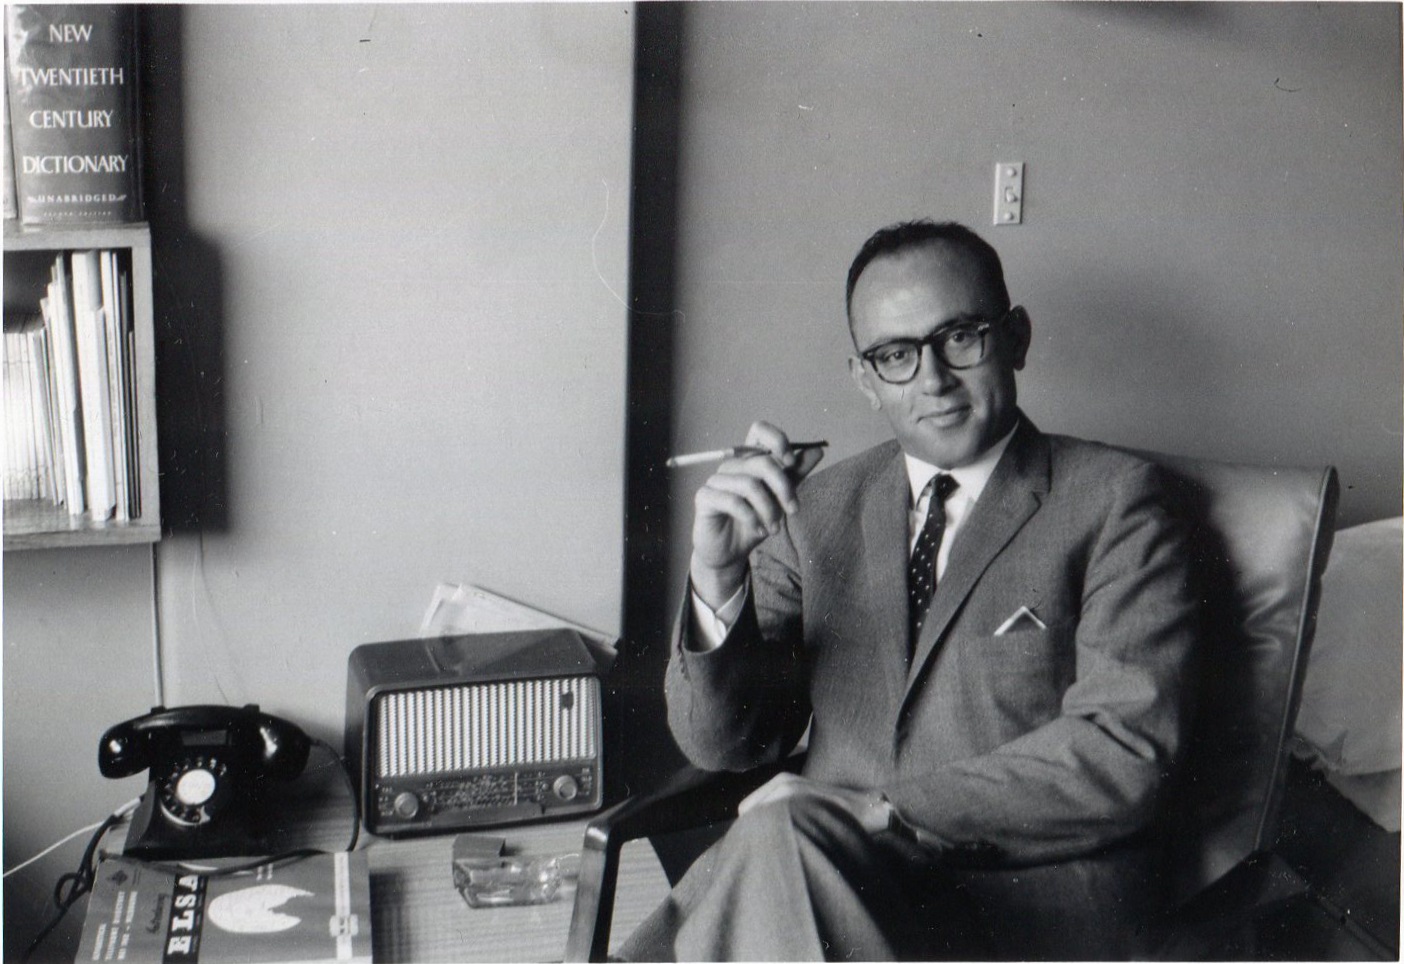 Black and white photograph of International House resident Nicos Kanaris seated and holding a cigarette.